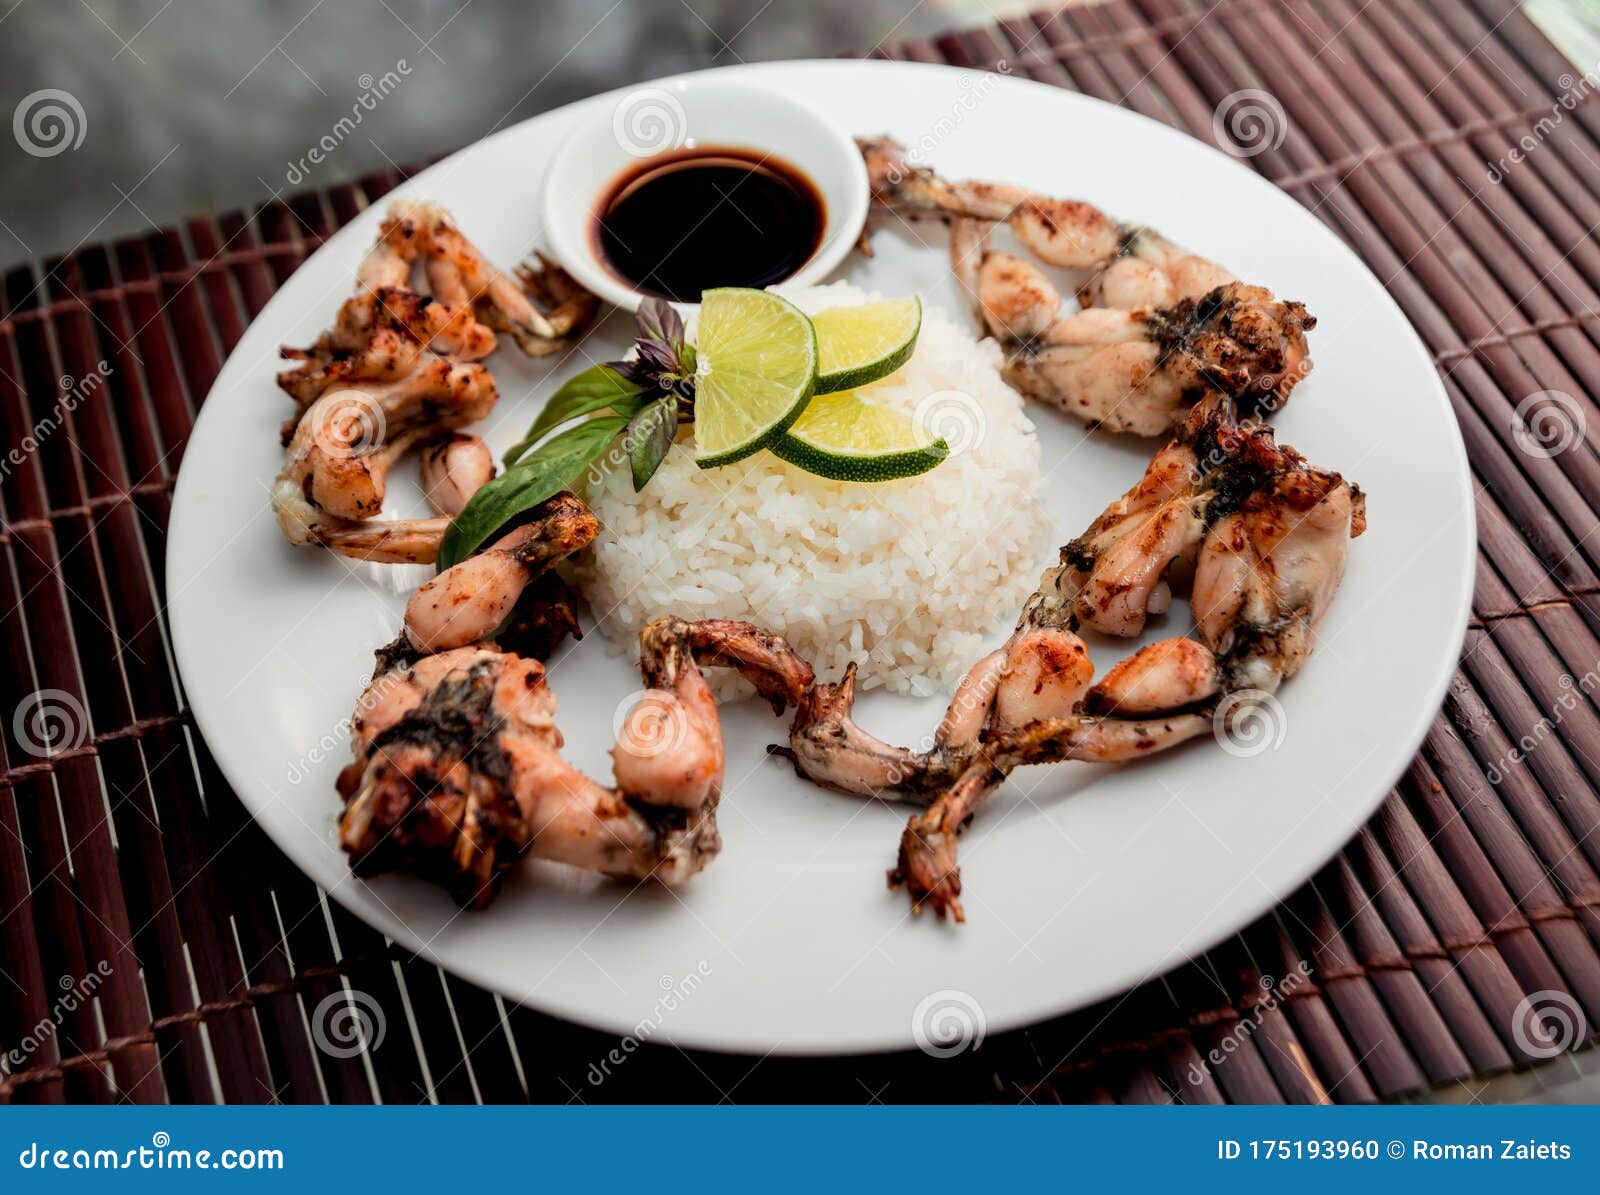 Grilled Frog Legs on the White Plate Stock Photo - Image of fillet ...